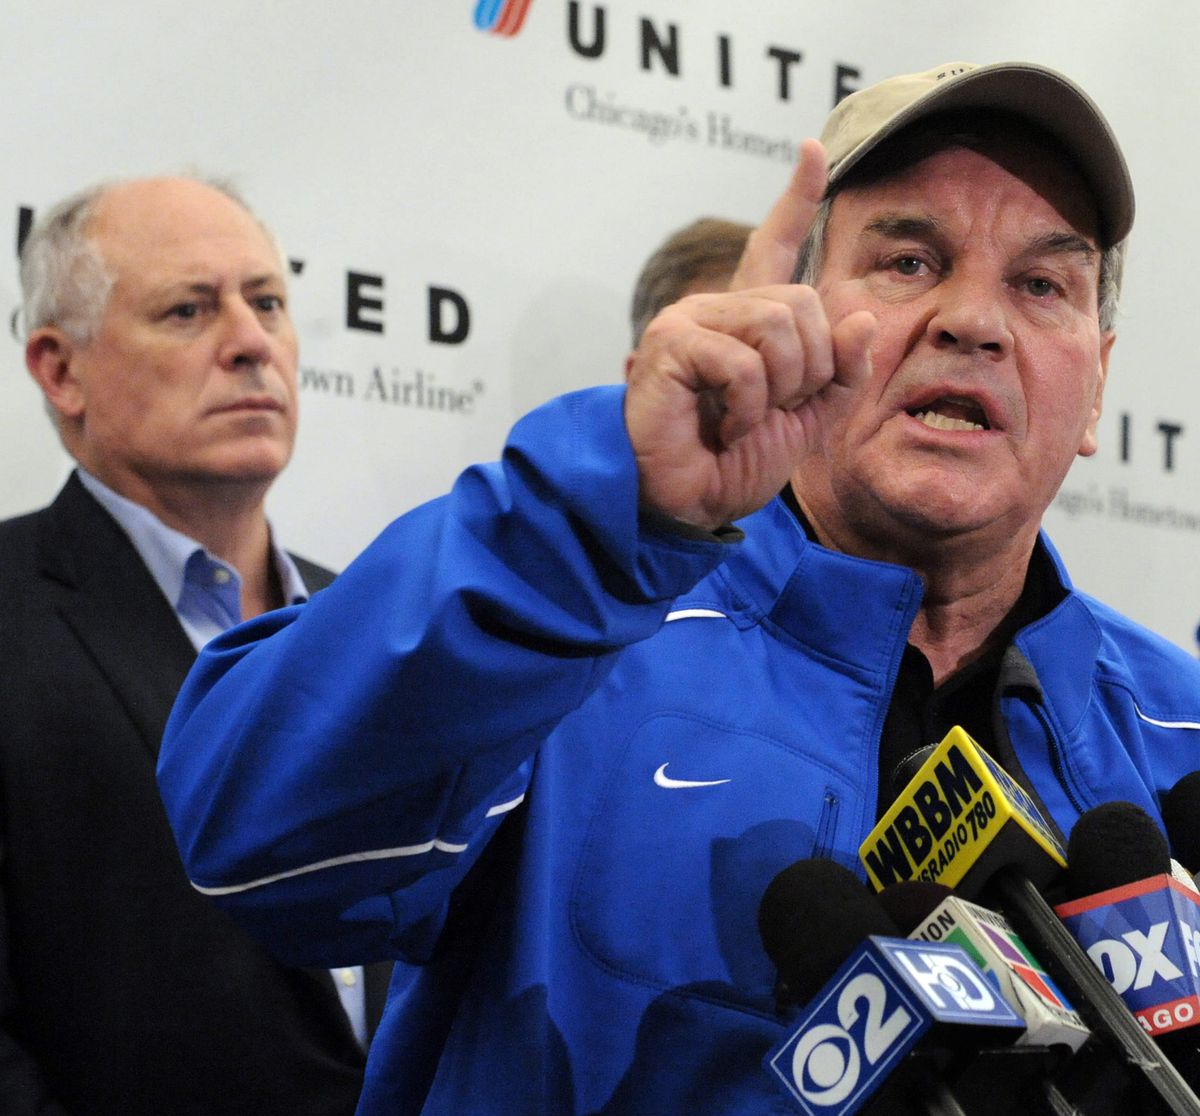 Mayor Richard Daley is shown in 2009 along with the rest of the Chicago 2016 Olympic bid team after it returned from Copenhagen, where Daley’s Olympic dream died. | Sun-Times file photo